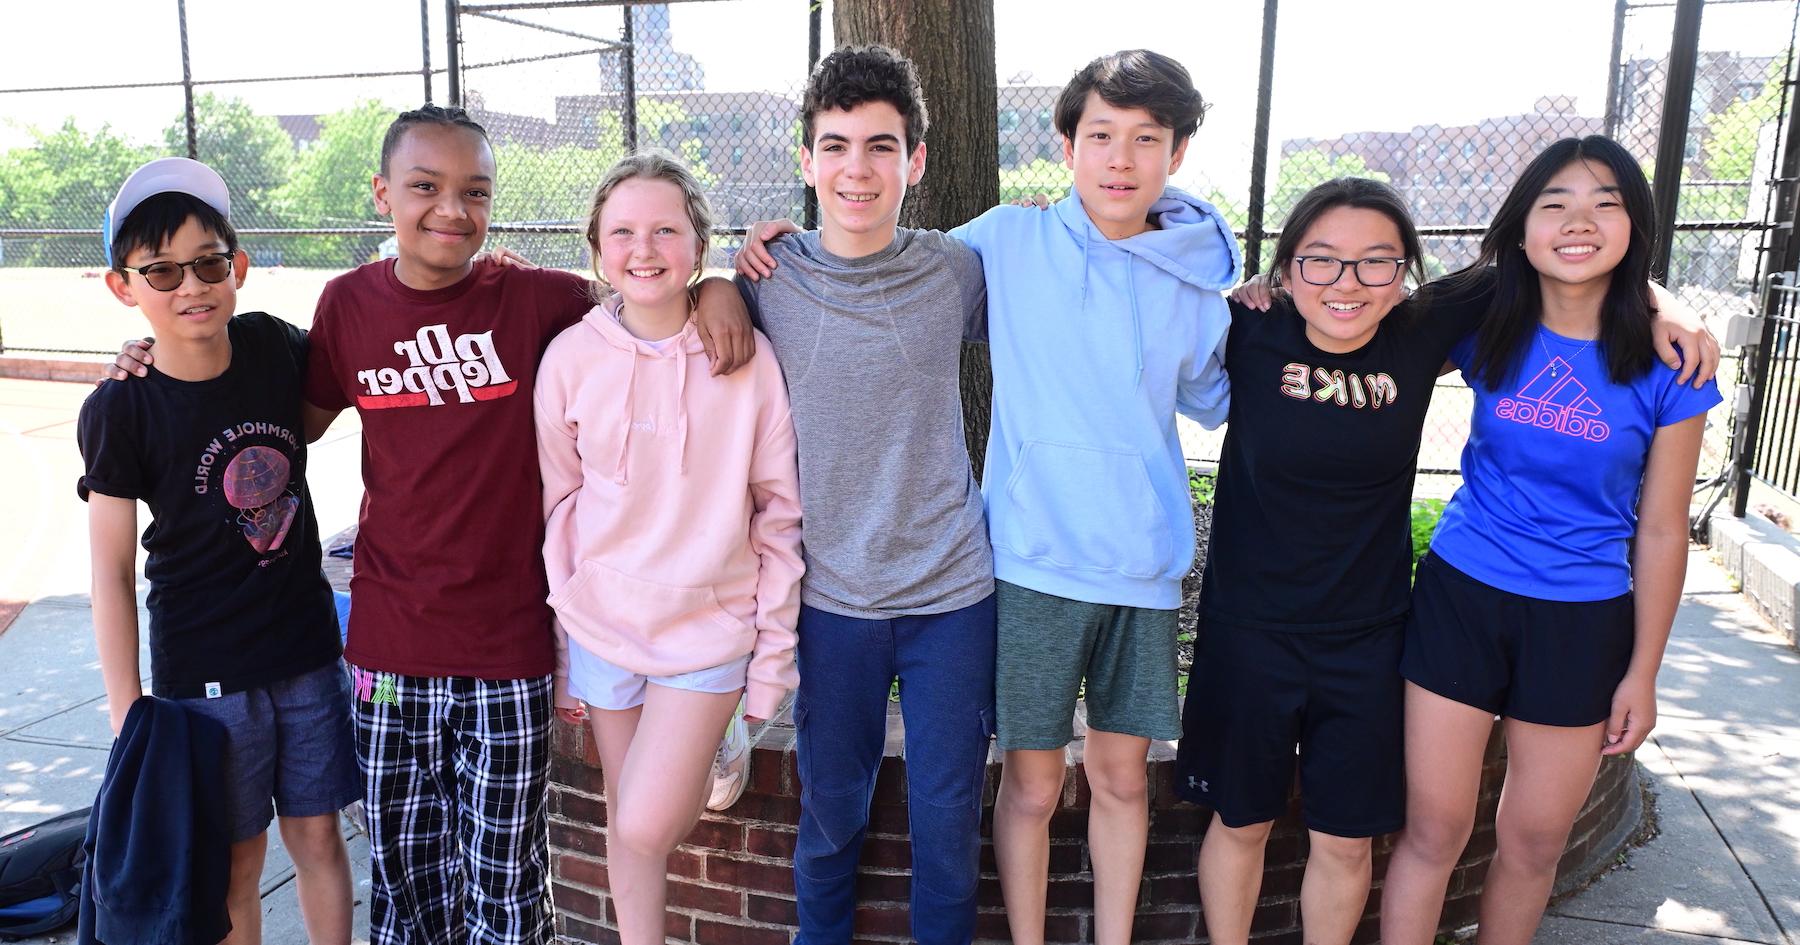 Ethical Culture Fieldston School Middle School Students stand together arms around each other smiling in the field